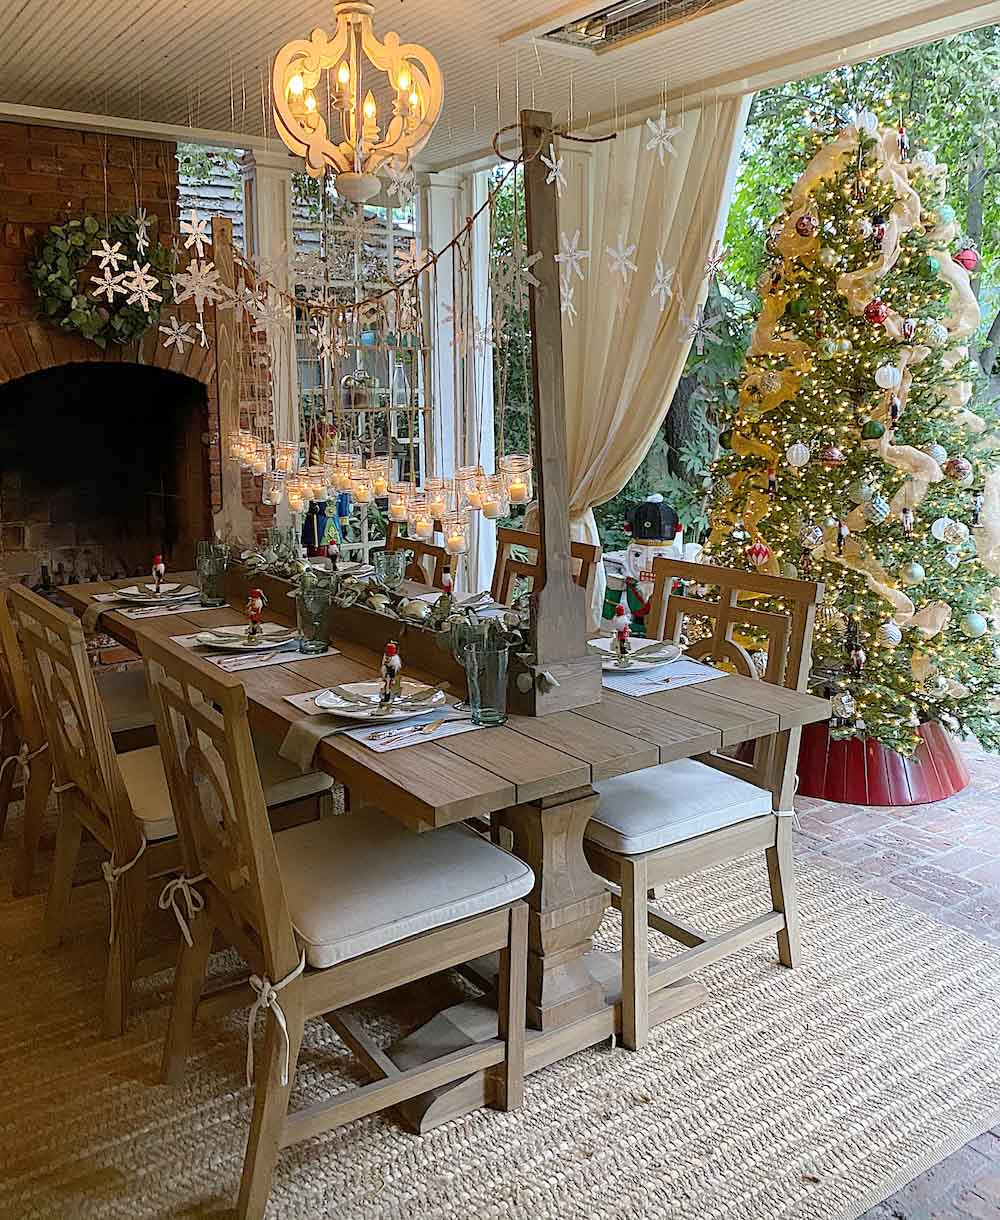 Dining room featuring fireplace with wreath. Styled with holiday decor and a Christmas tree in the background